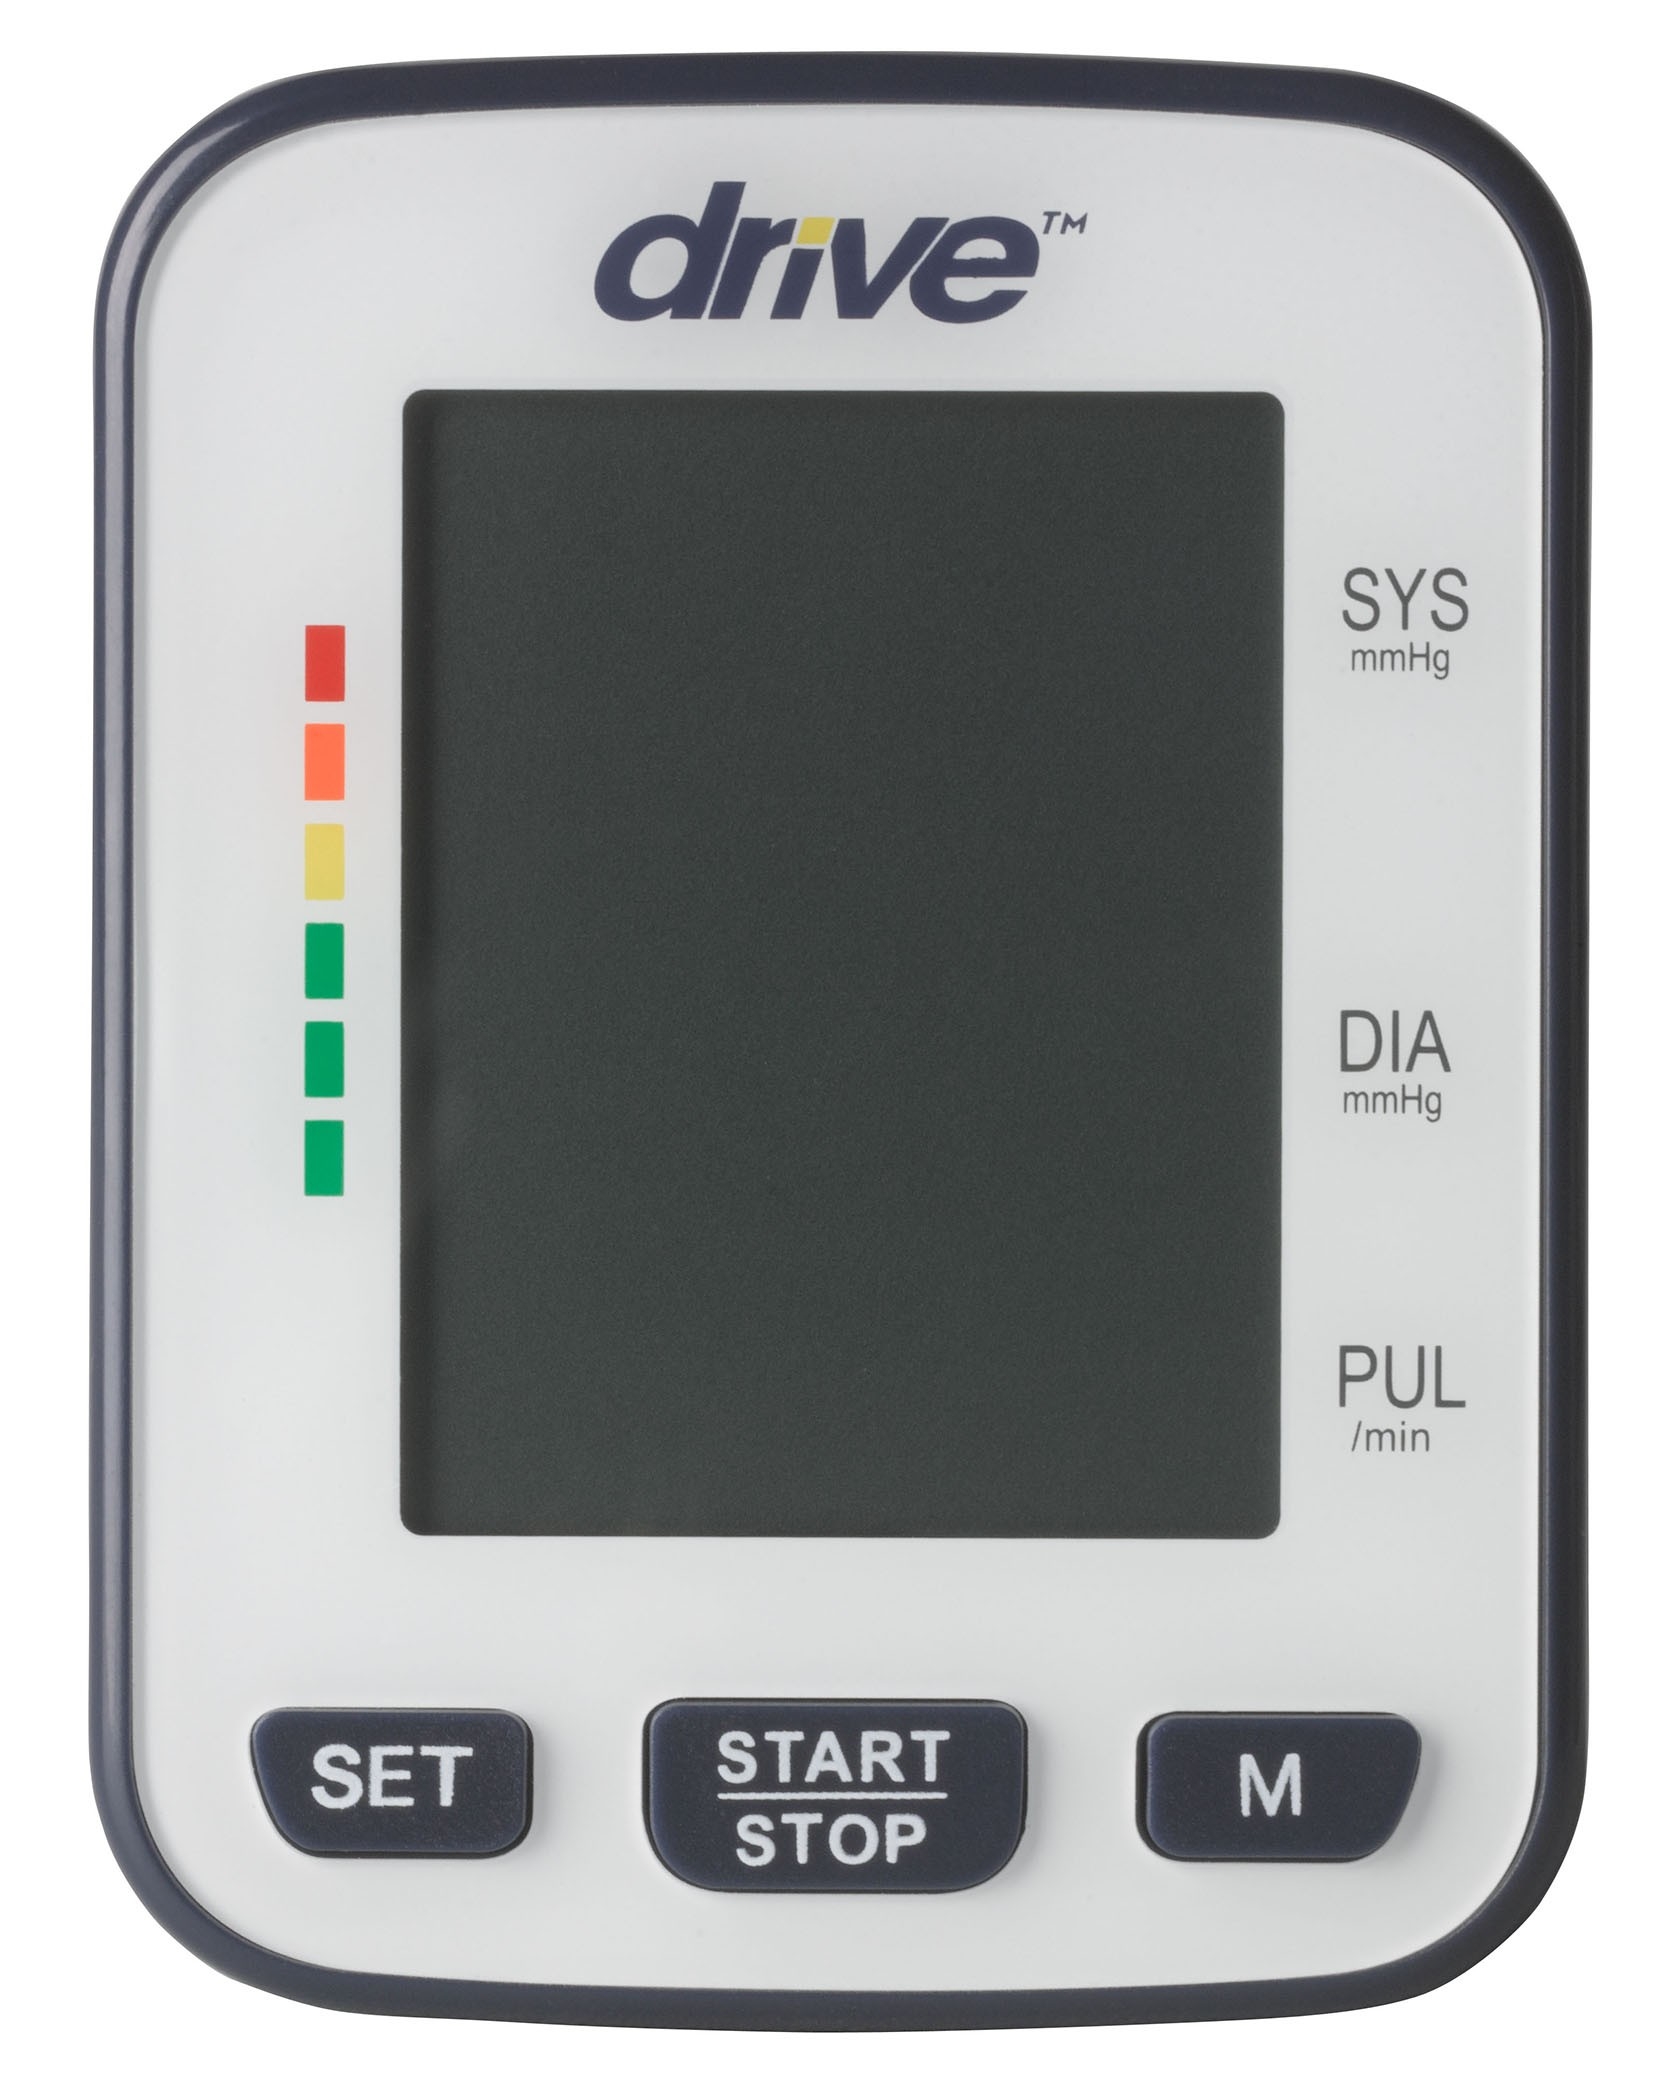 Automatic Deluxe Blood Pressure Monitor